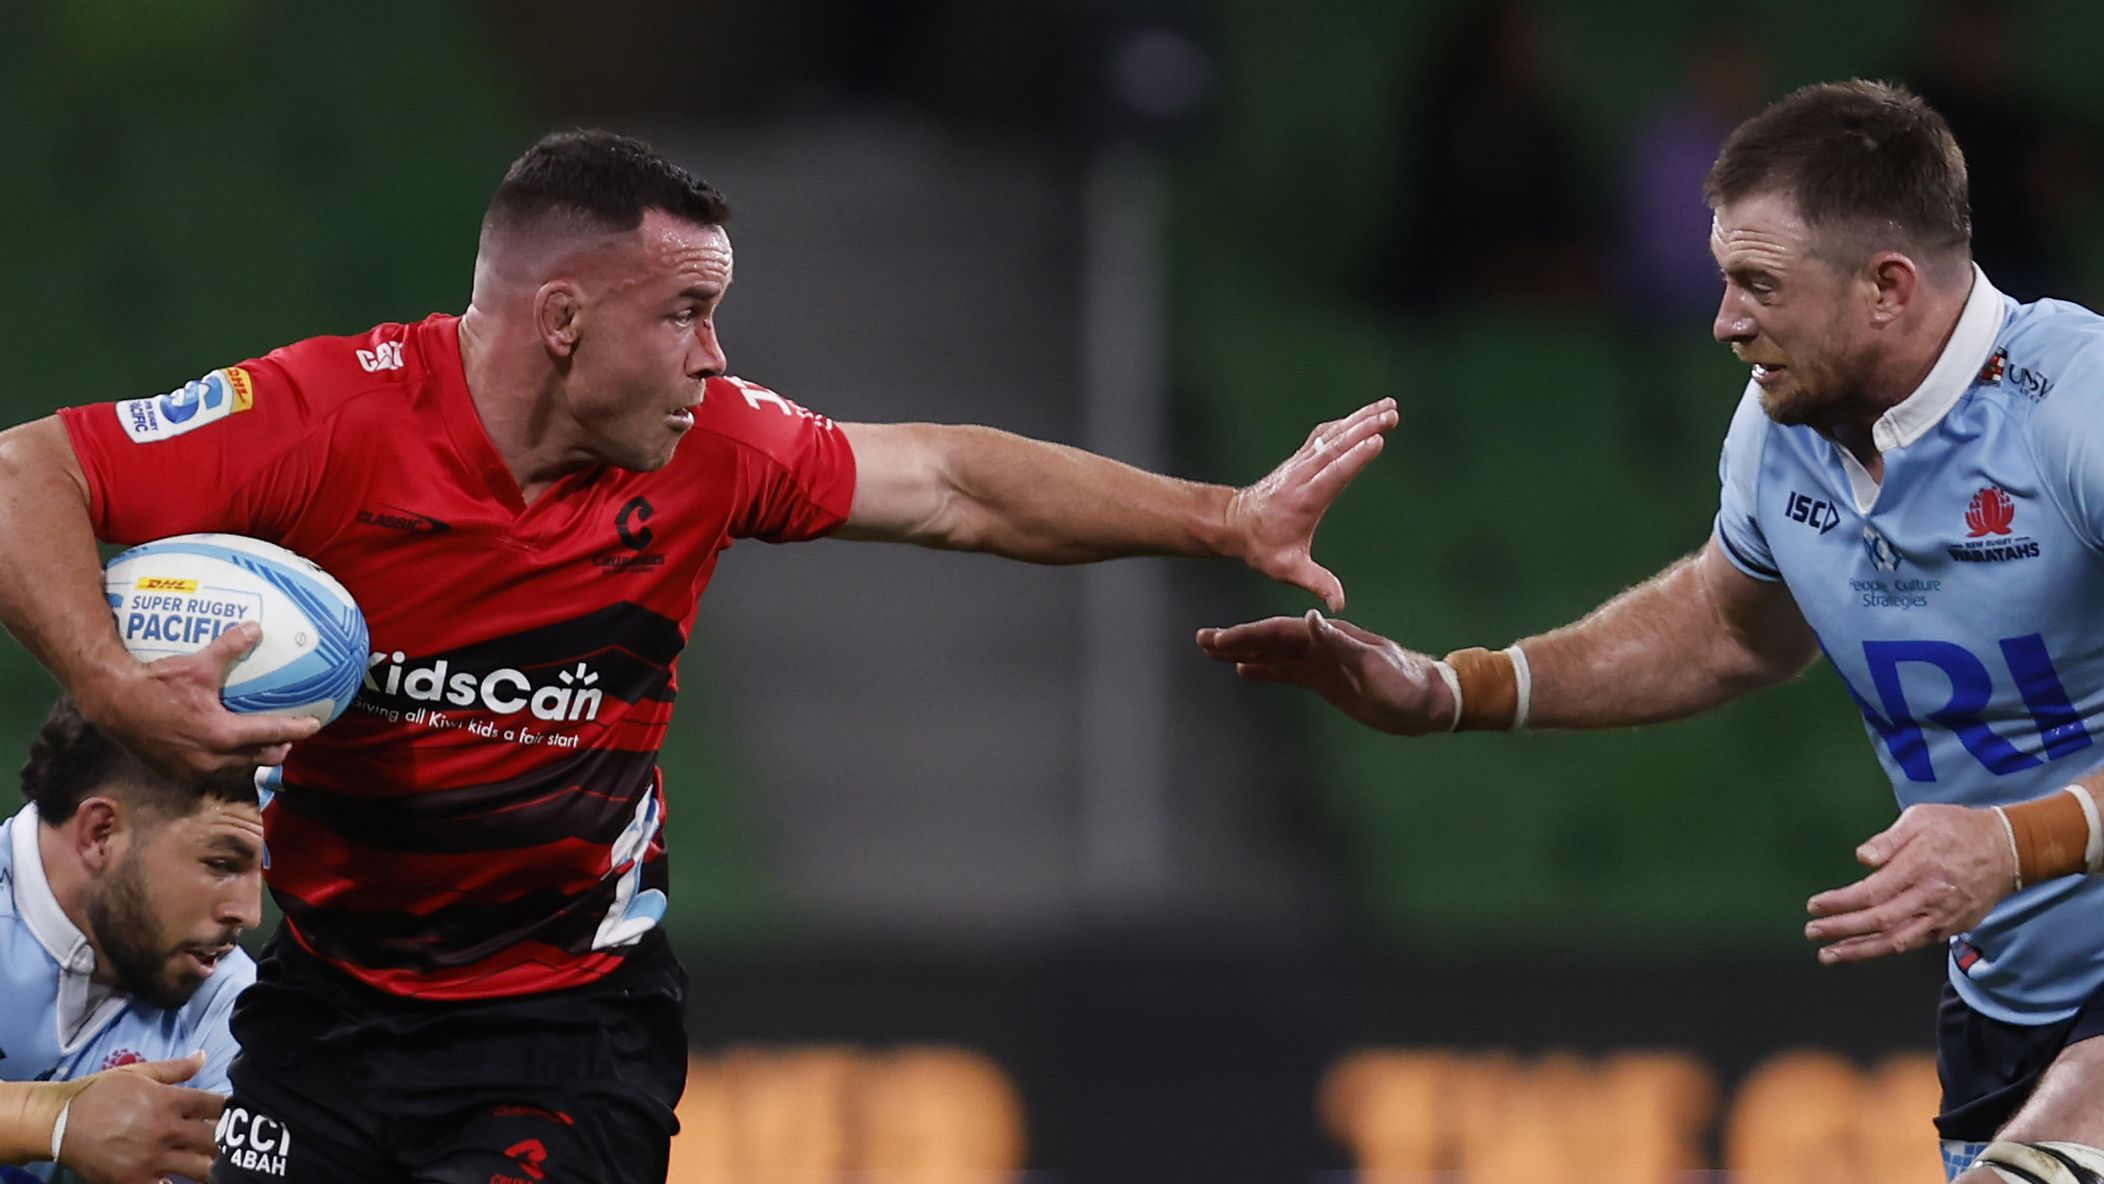 Ryan Crotty runs with the ball during the round two Super Rugby Pacific match between Crusaders and NSW Waratahs.